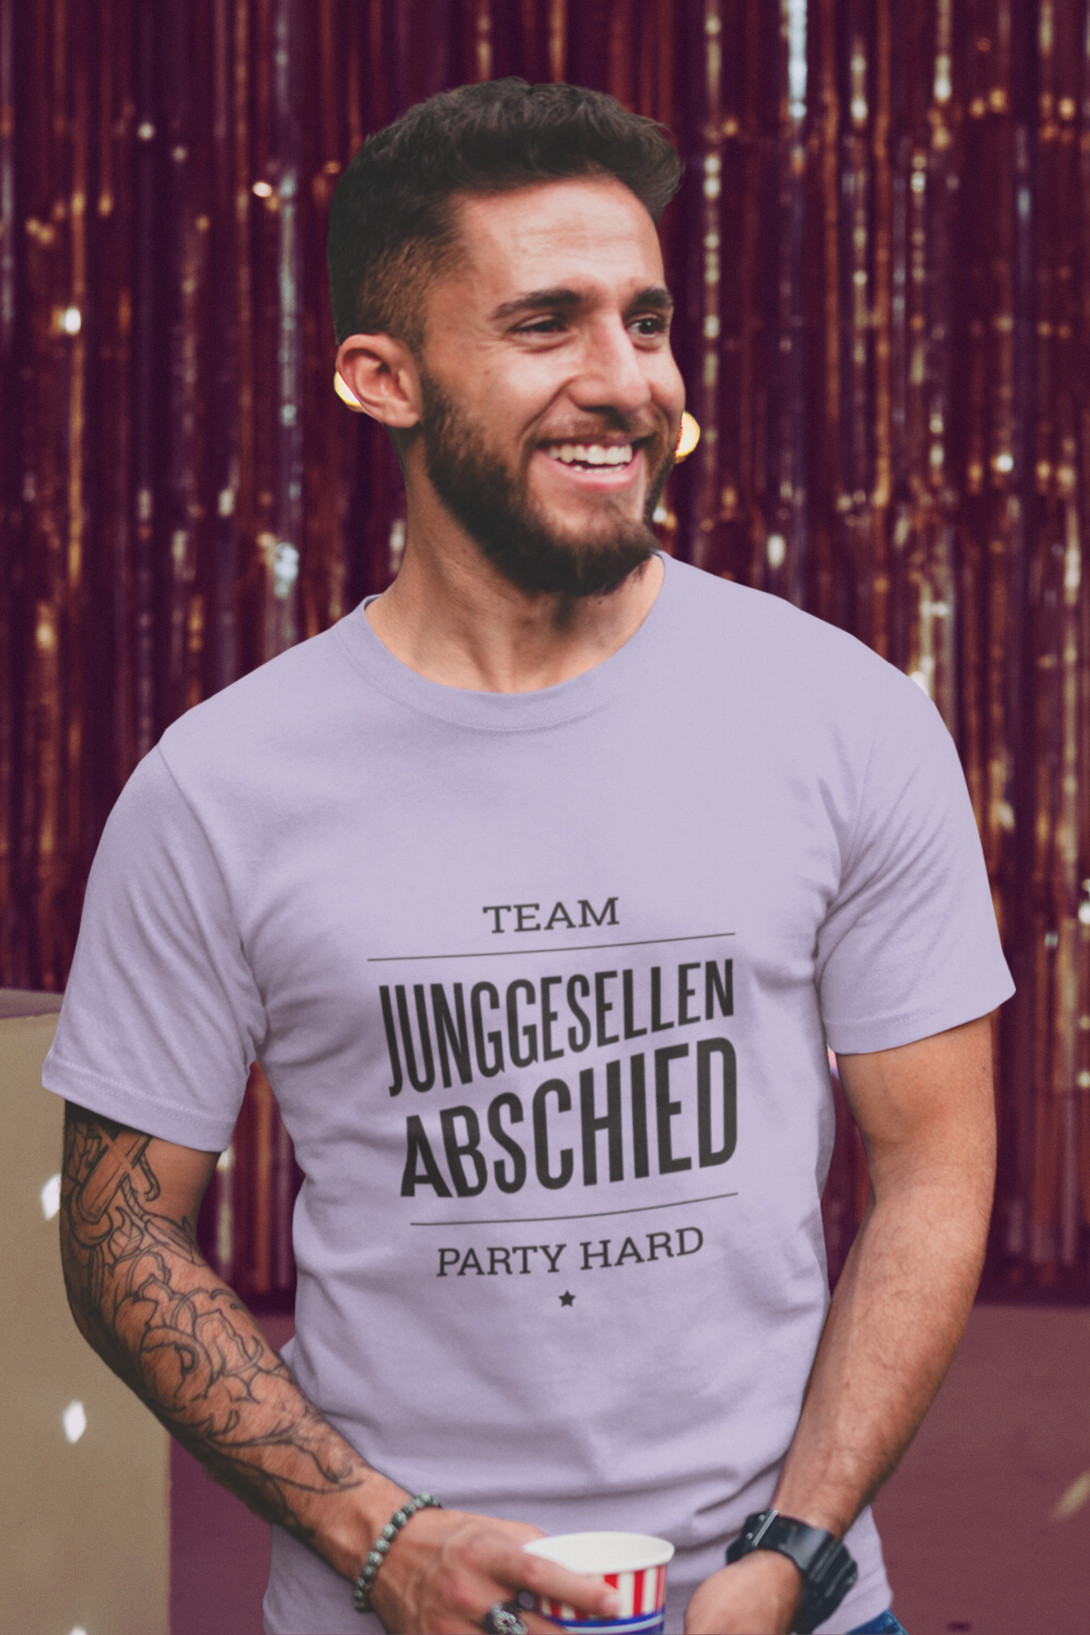 German Bachelor Party Printed T-Shirt For Men - WowWaves - 5